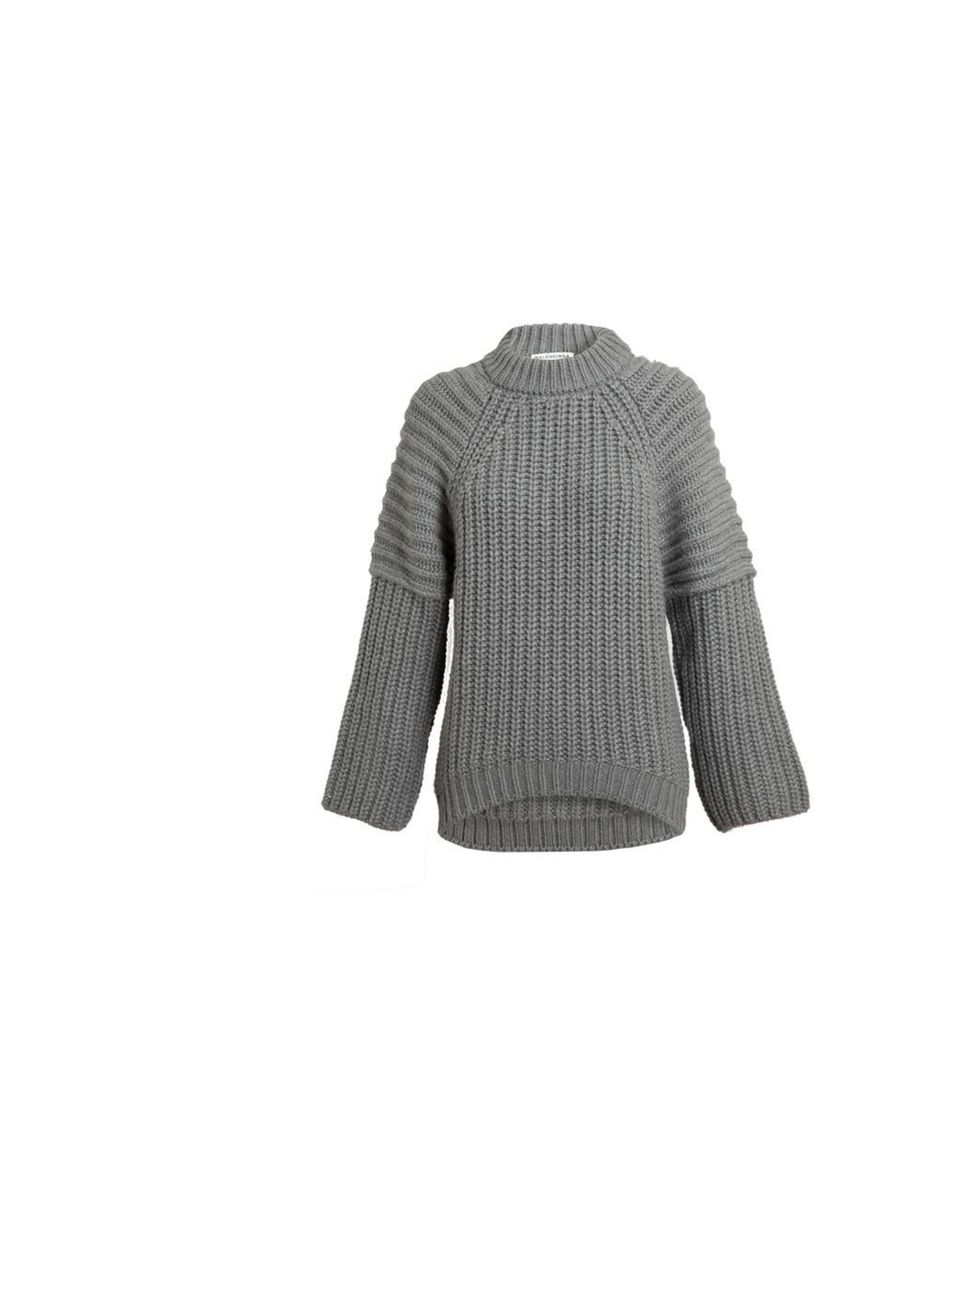 <p>Balenciaga jumper, currently £625, will be £313 from <a href="http://www.brownsfashion.com">Browns</a></p><p>Don't miss out on additional online discount codes and exclusive sale tips only in this months issue of ELLE. </p><p><em><a href="https://itune